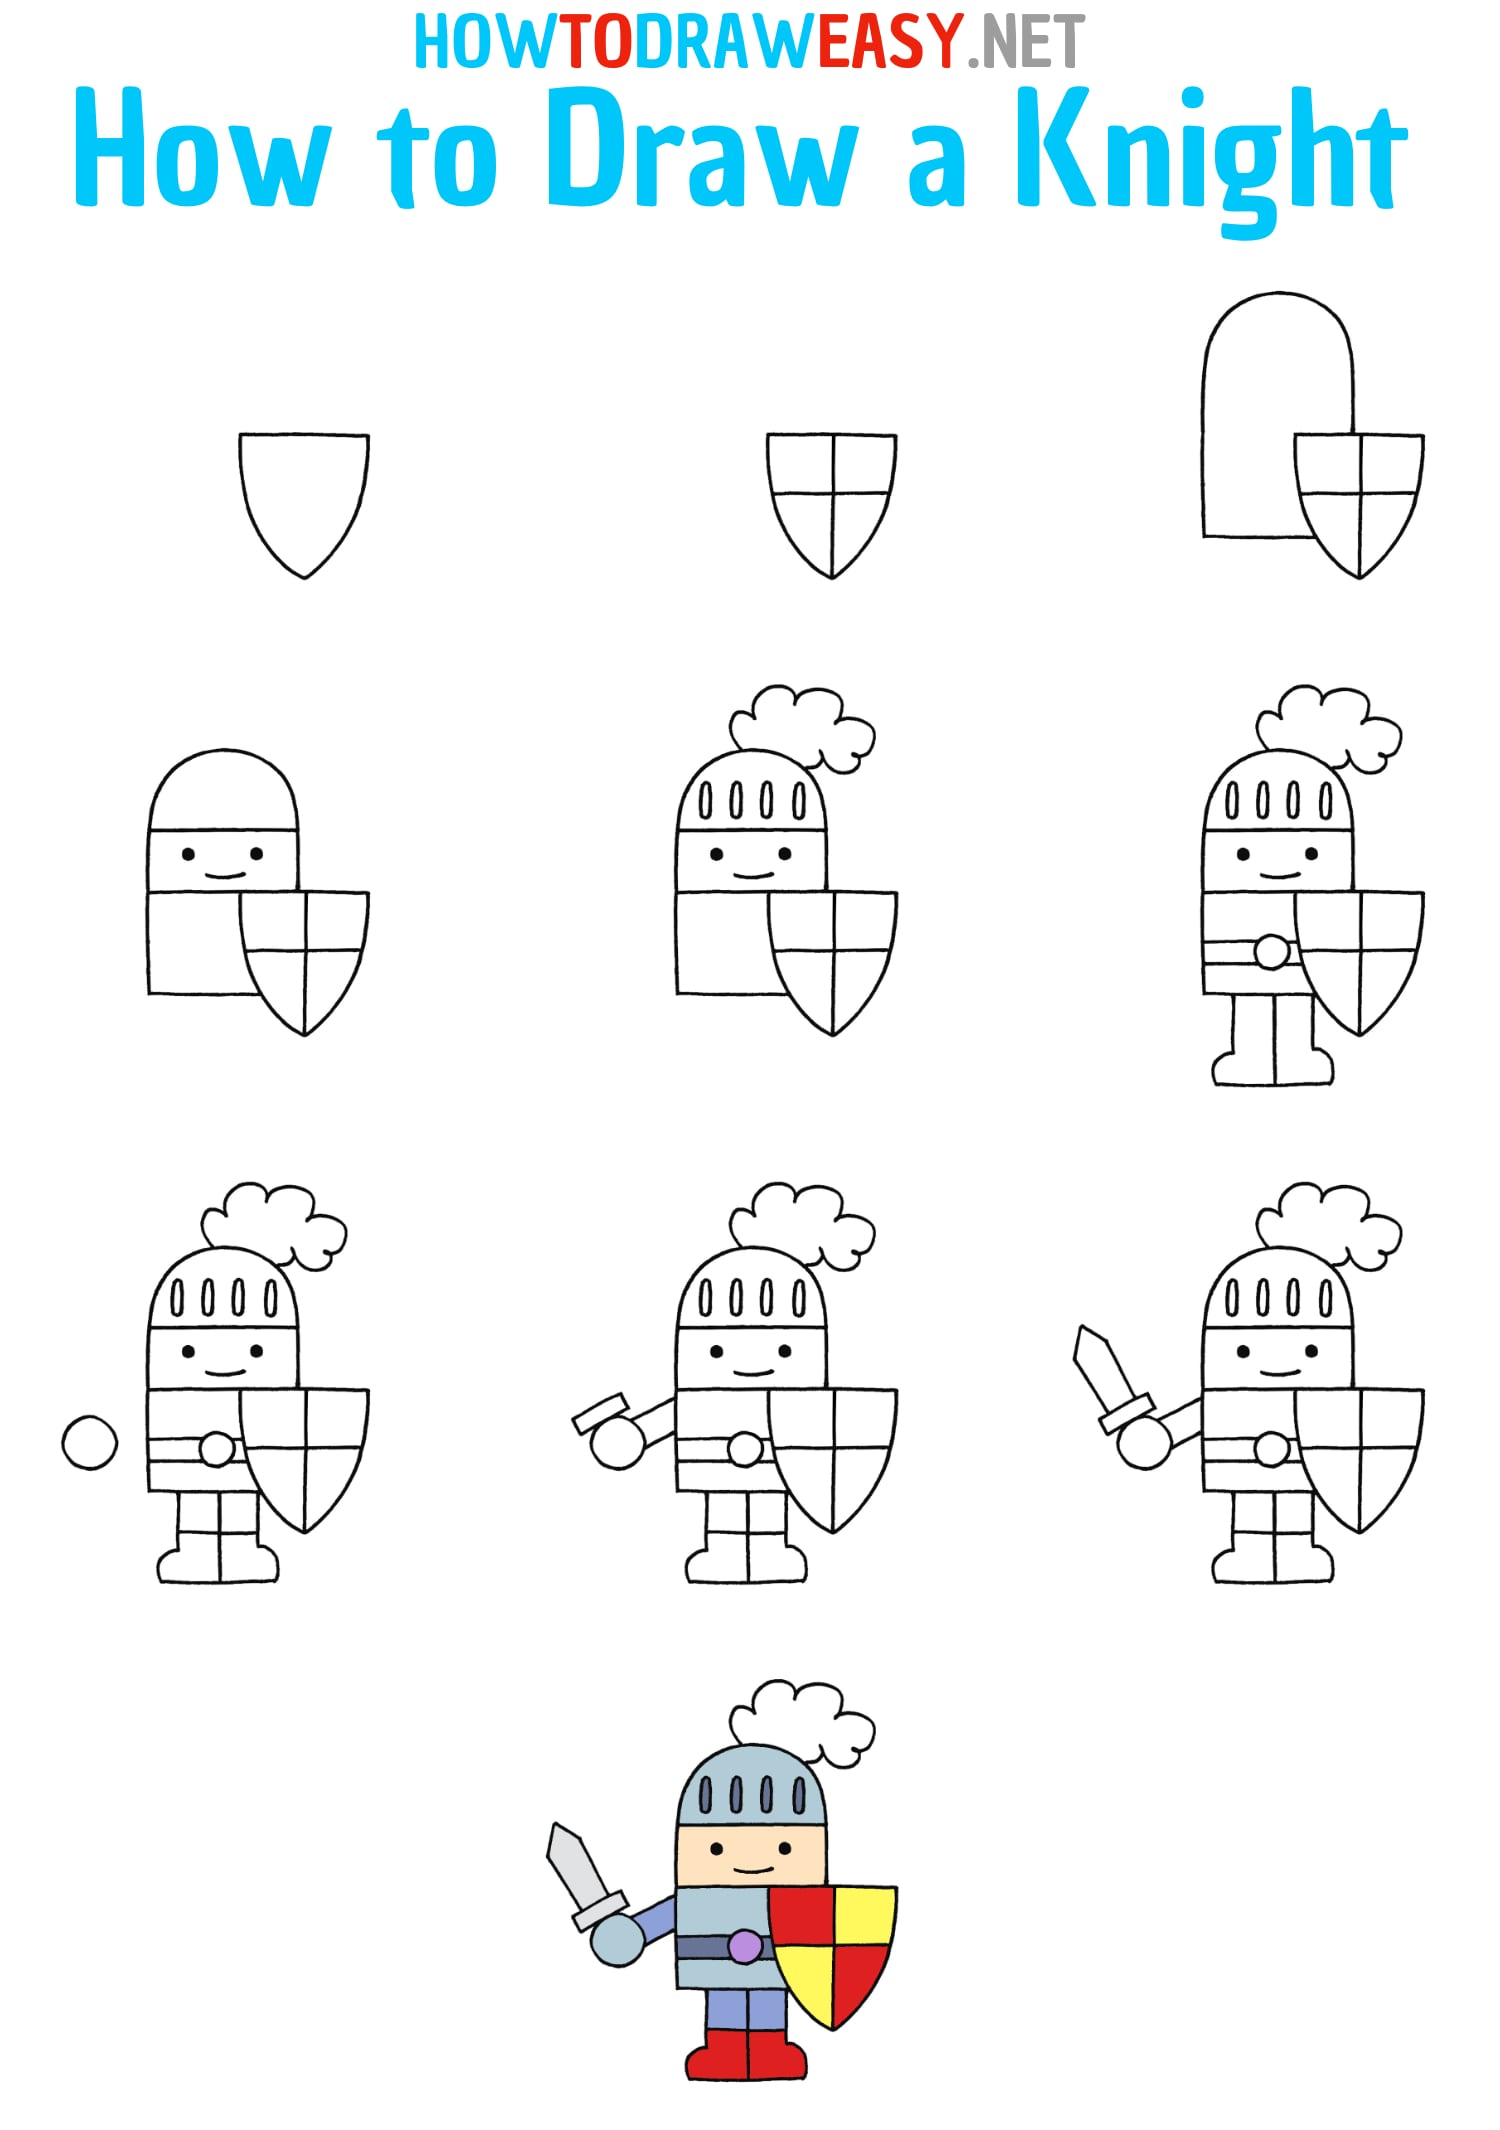 How to Draw a Knight Step by Step